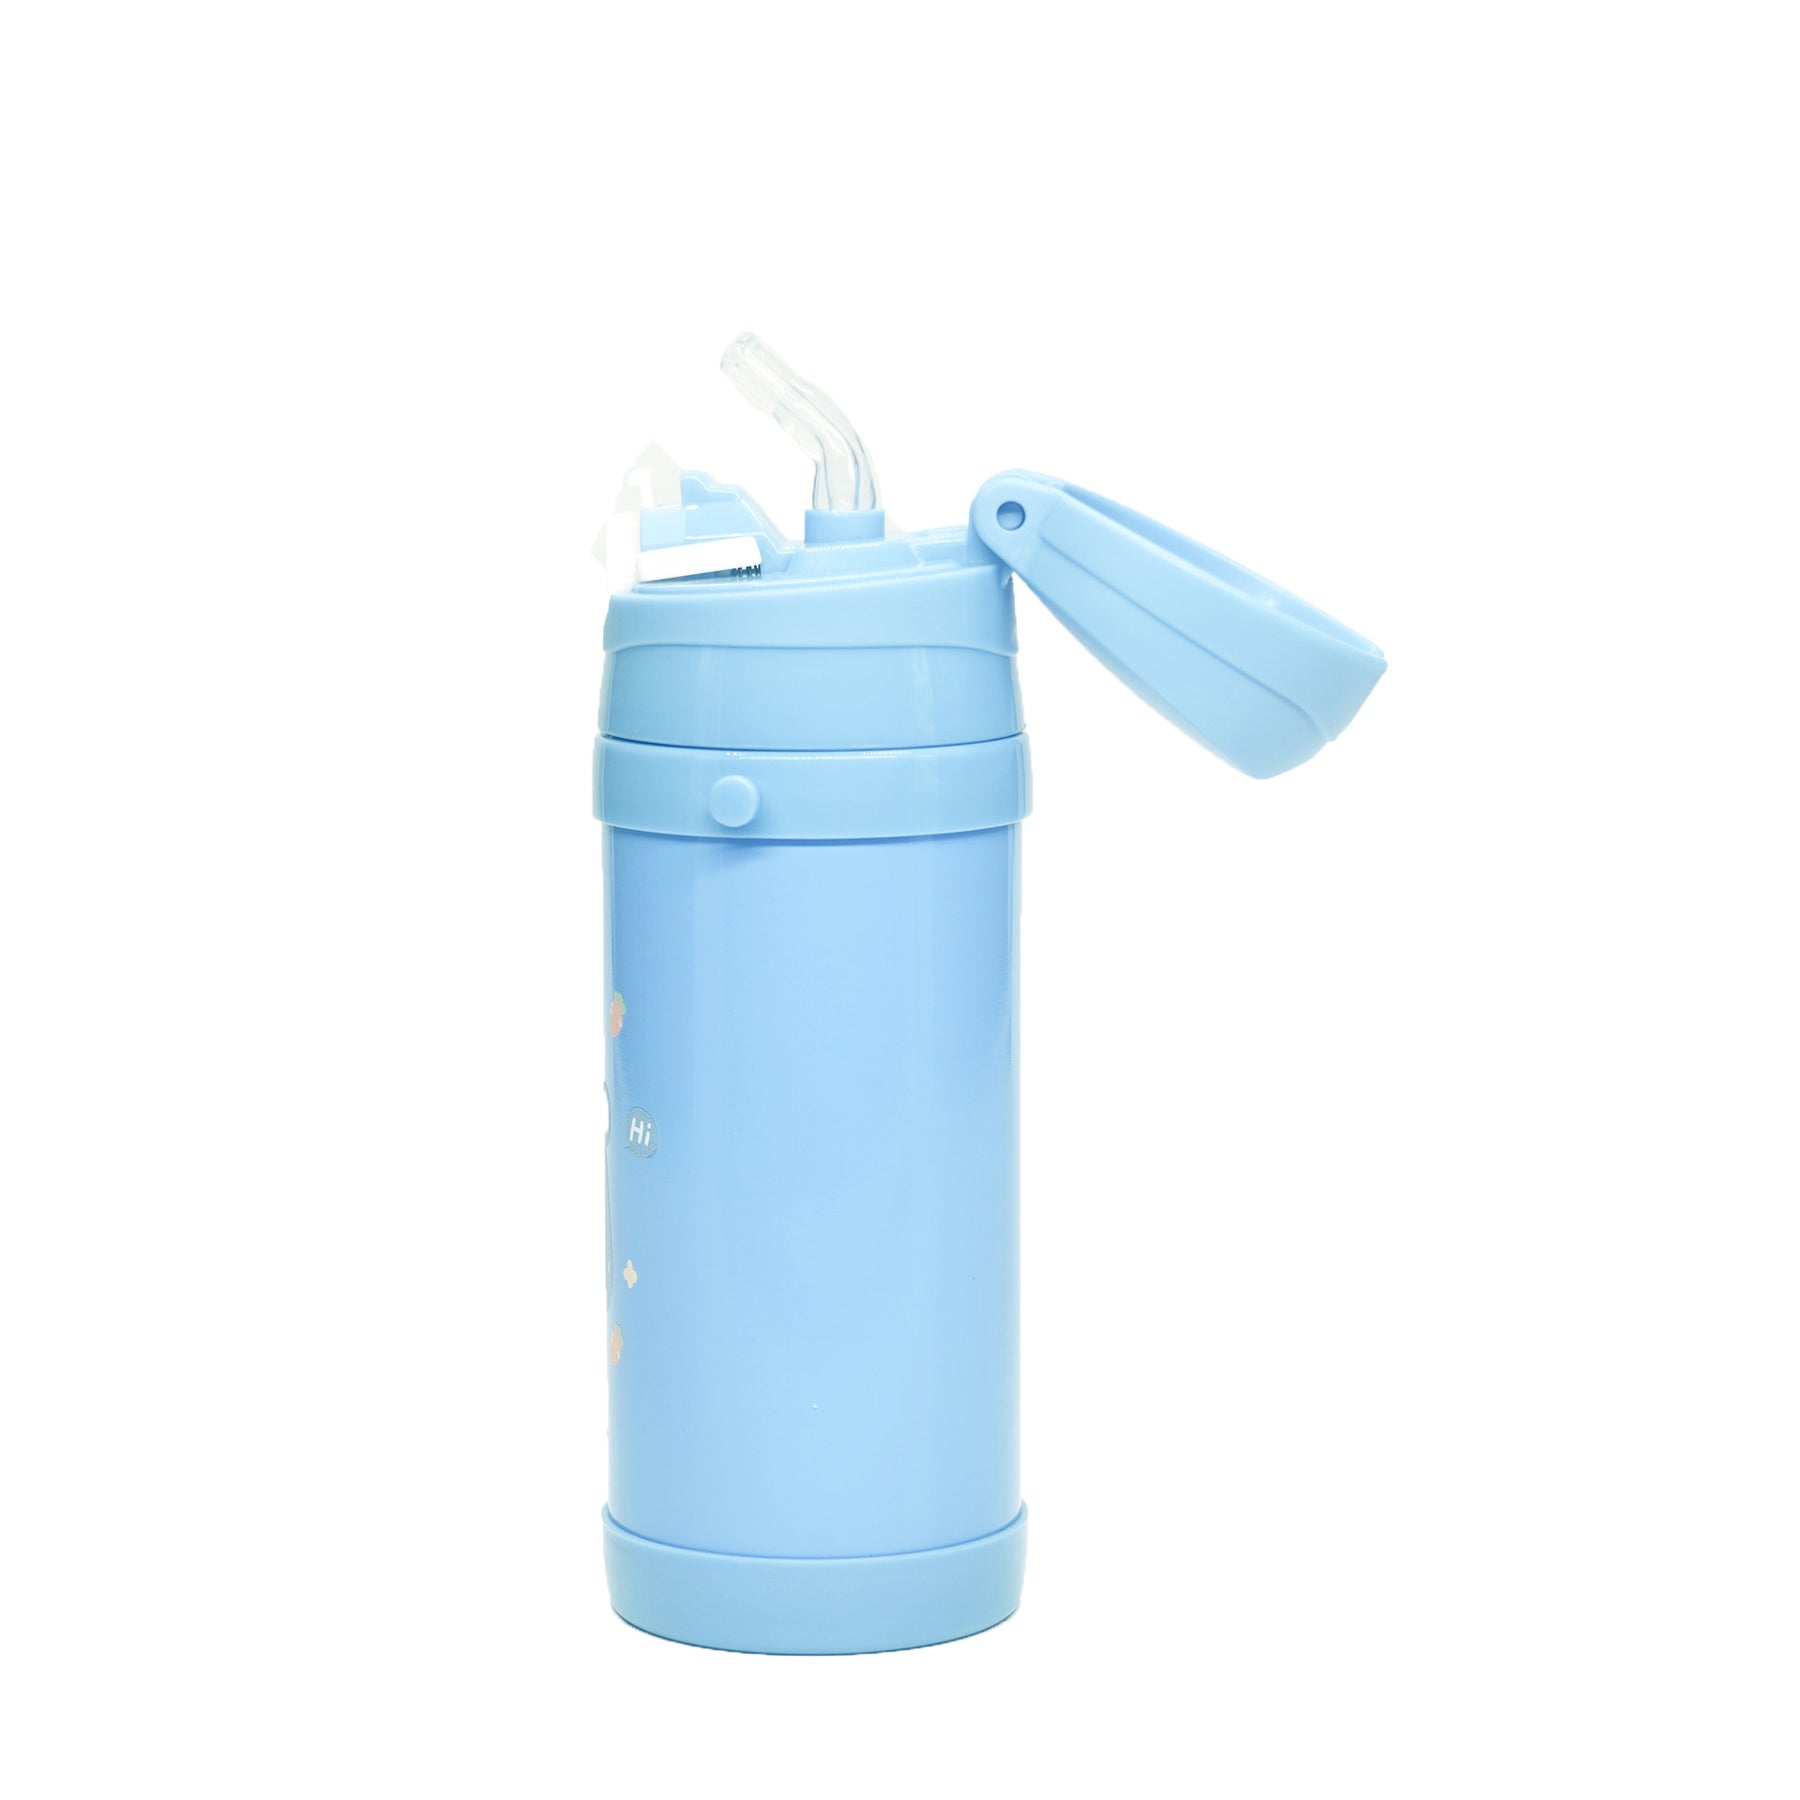 FUNSIP 420ML VACUUM STAINLESS STEEL BOTTLE BLUE with carry strap